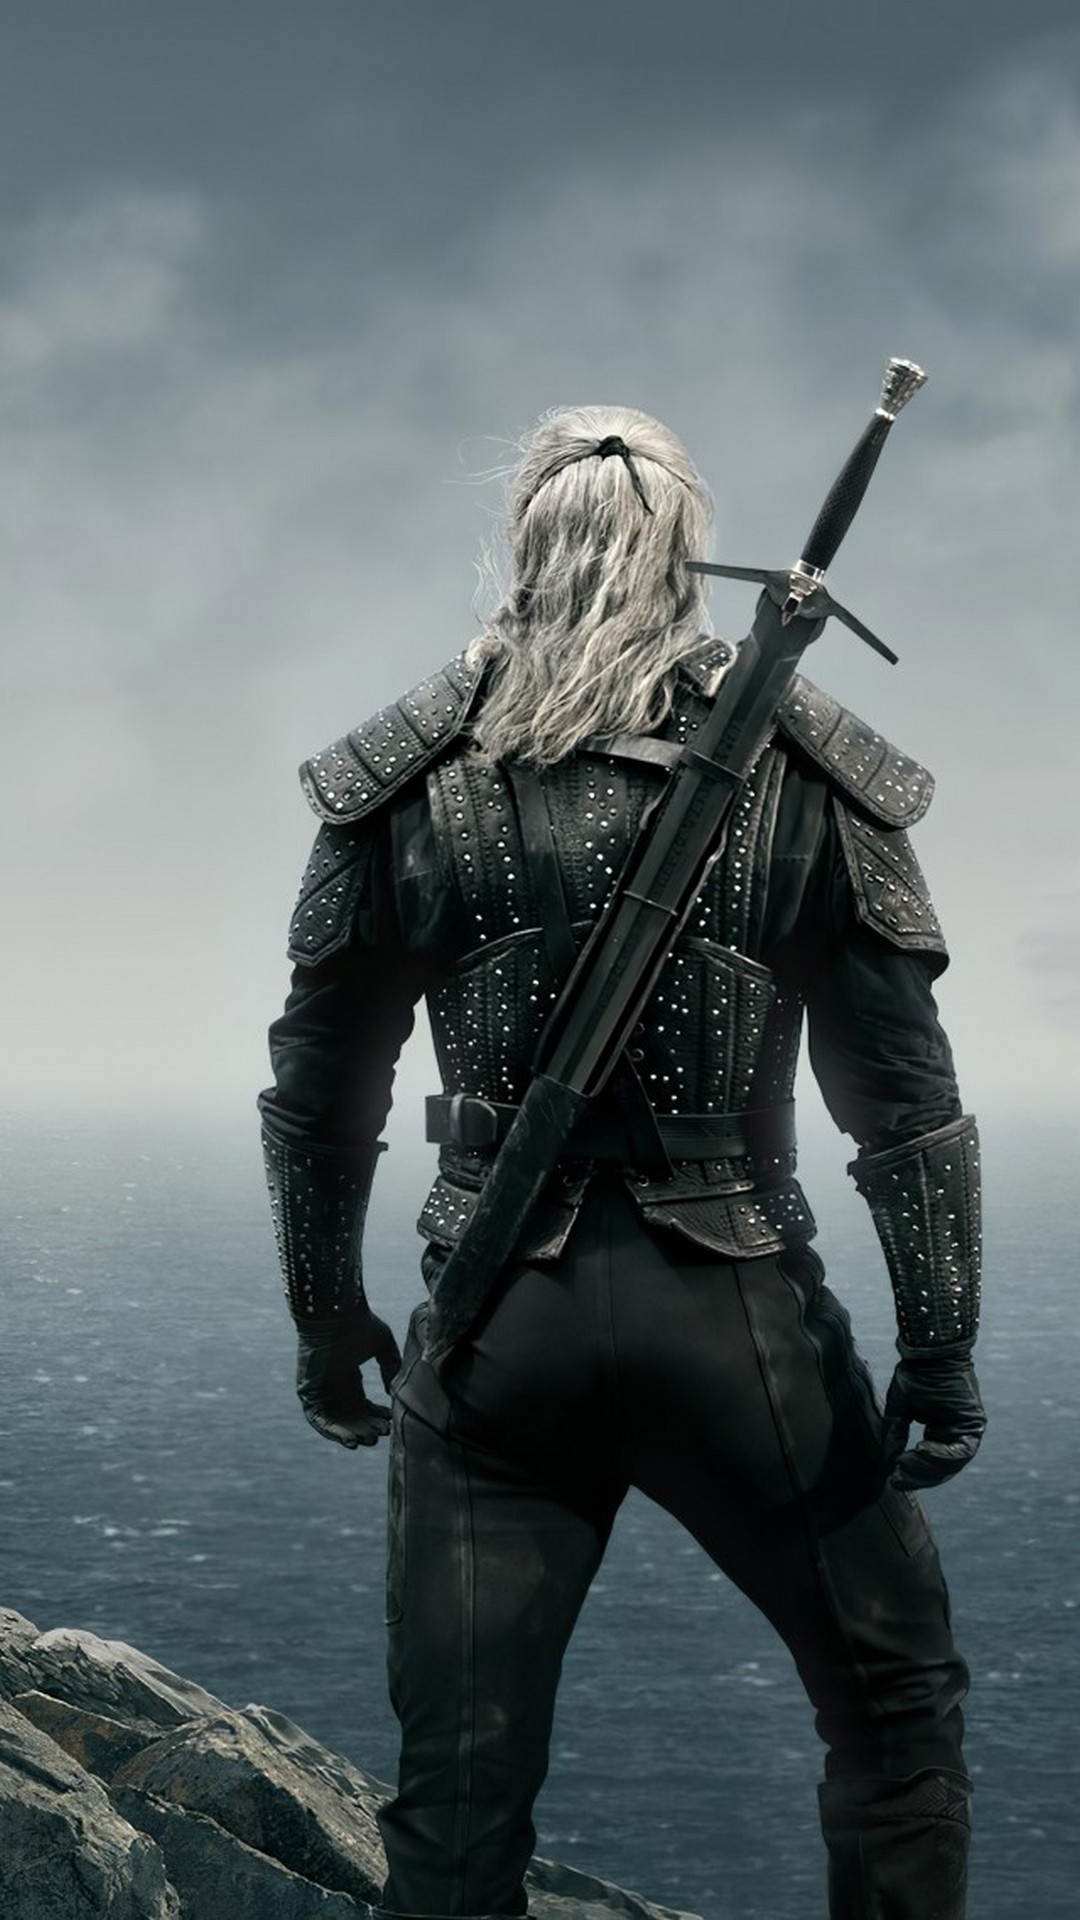 The Witcher iPhone 6 Wallpaper With high-resolution 1080X1920 pixel. You can use this wallpaper for your iPhone 5, 6, 7, 8, X, XS, XR backgrounds, Mobile Screensaver, or iPad Lock Screen